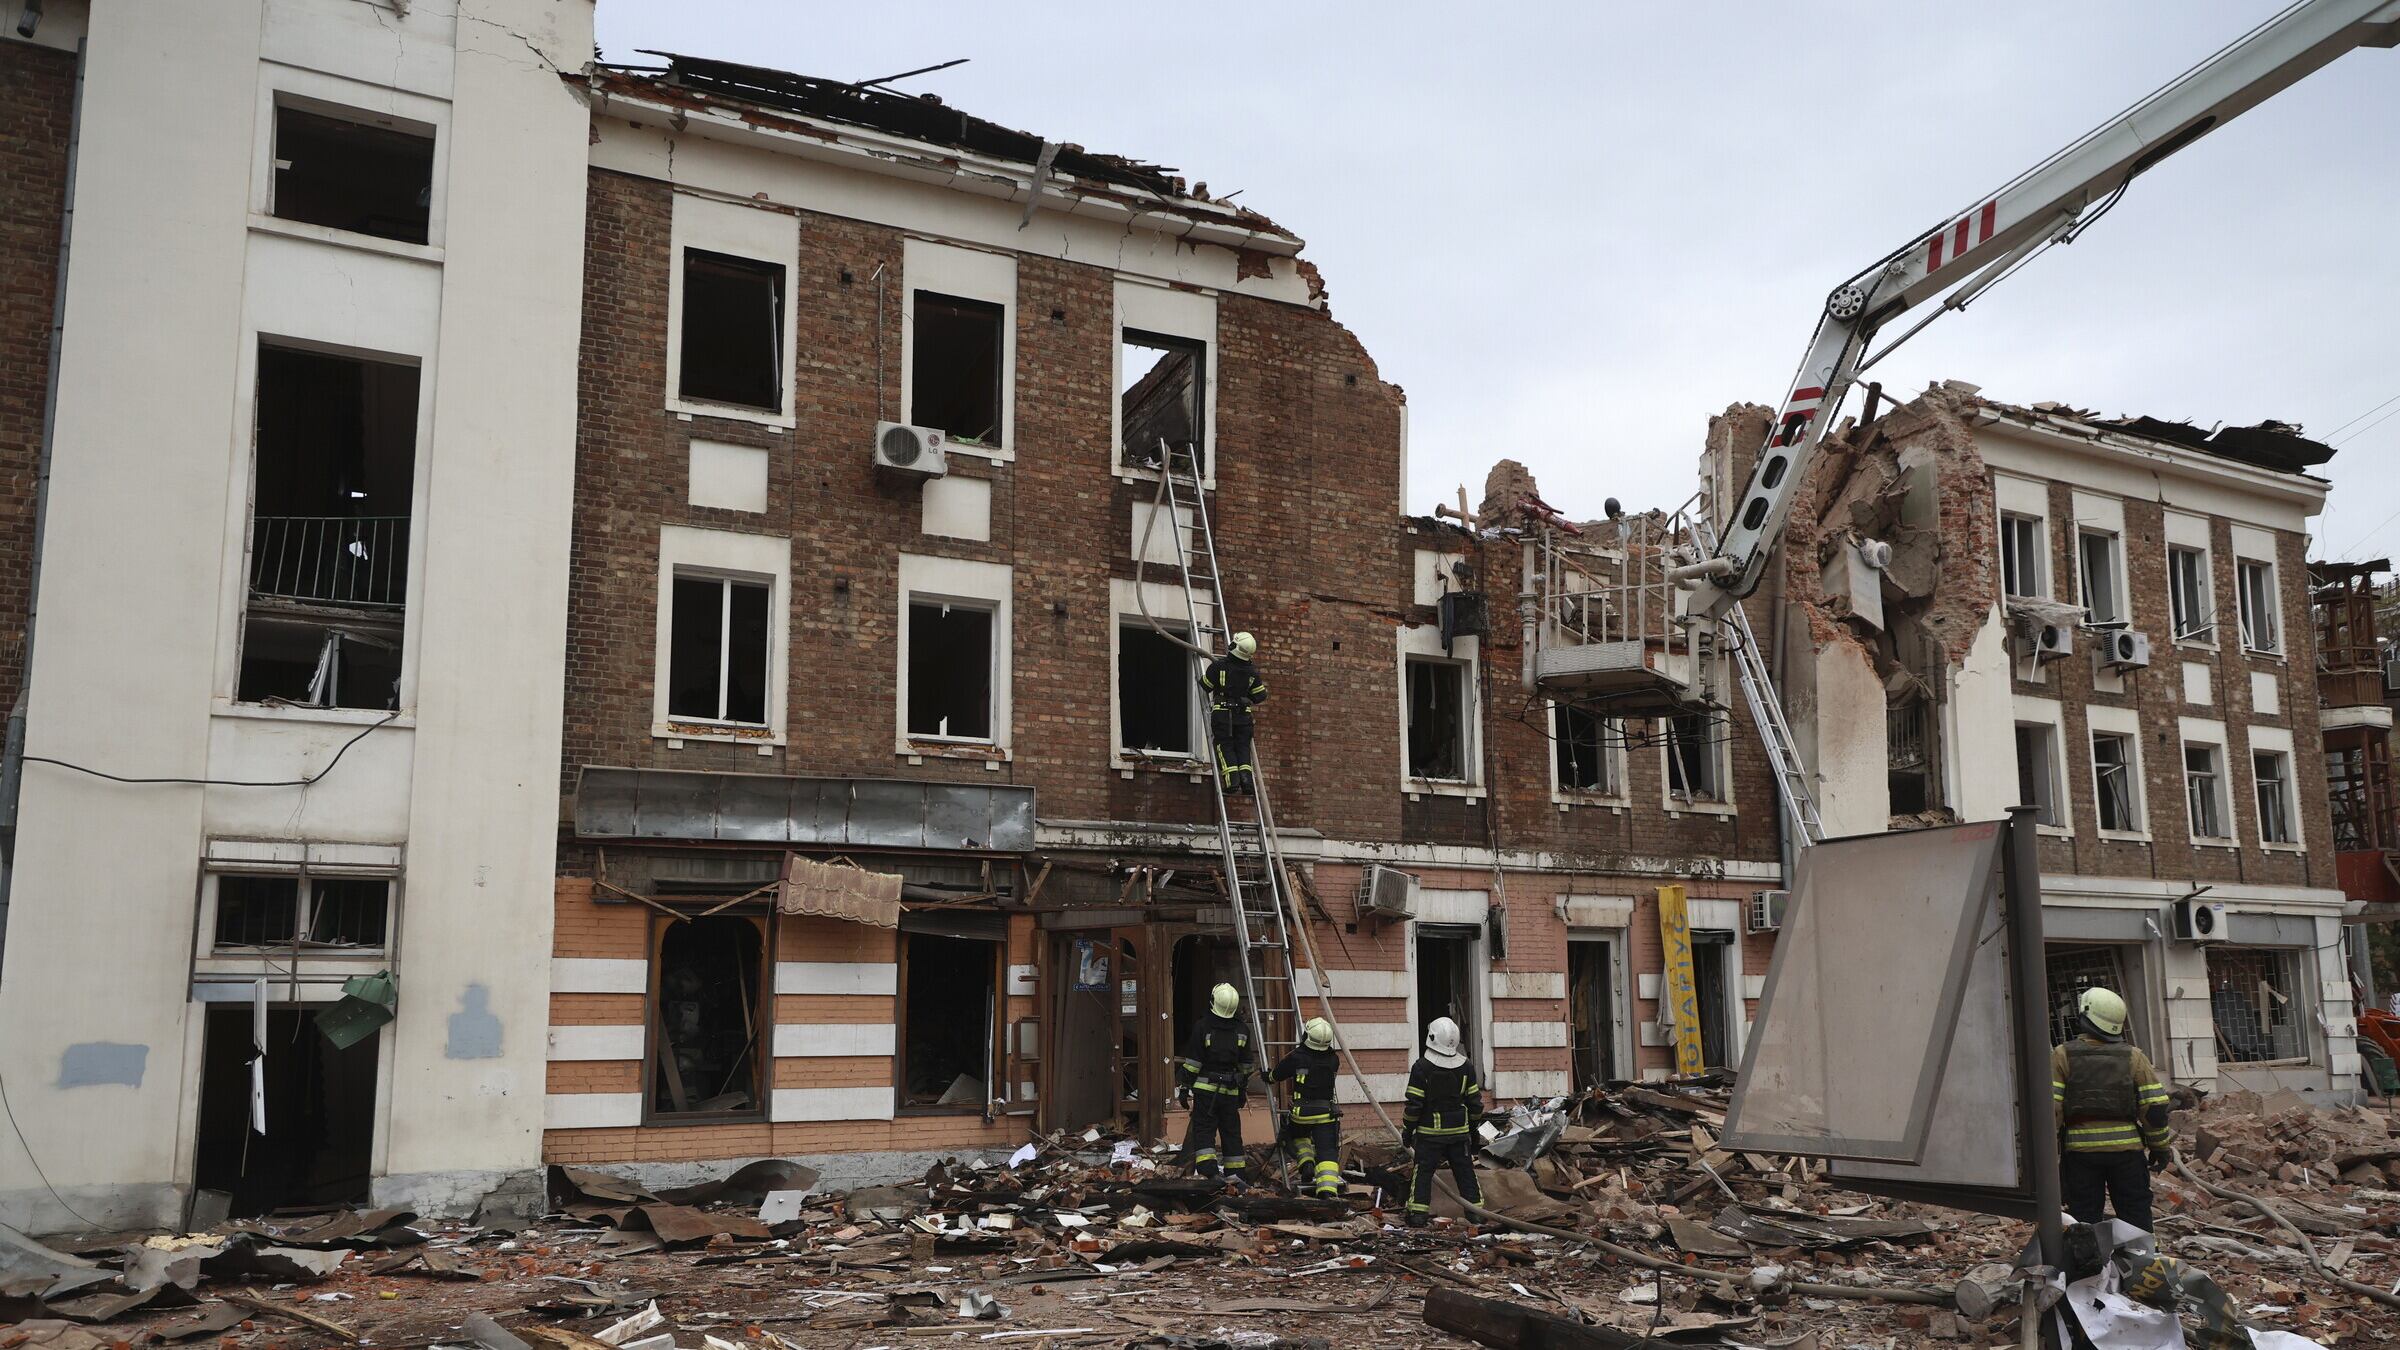 Emergency workers consider the structure of the building after the attack (AP Photo/Alex Babenko)